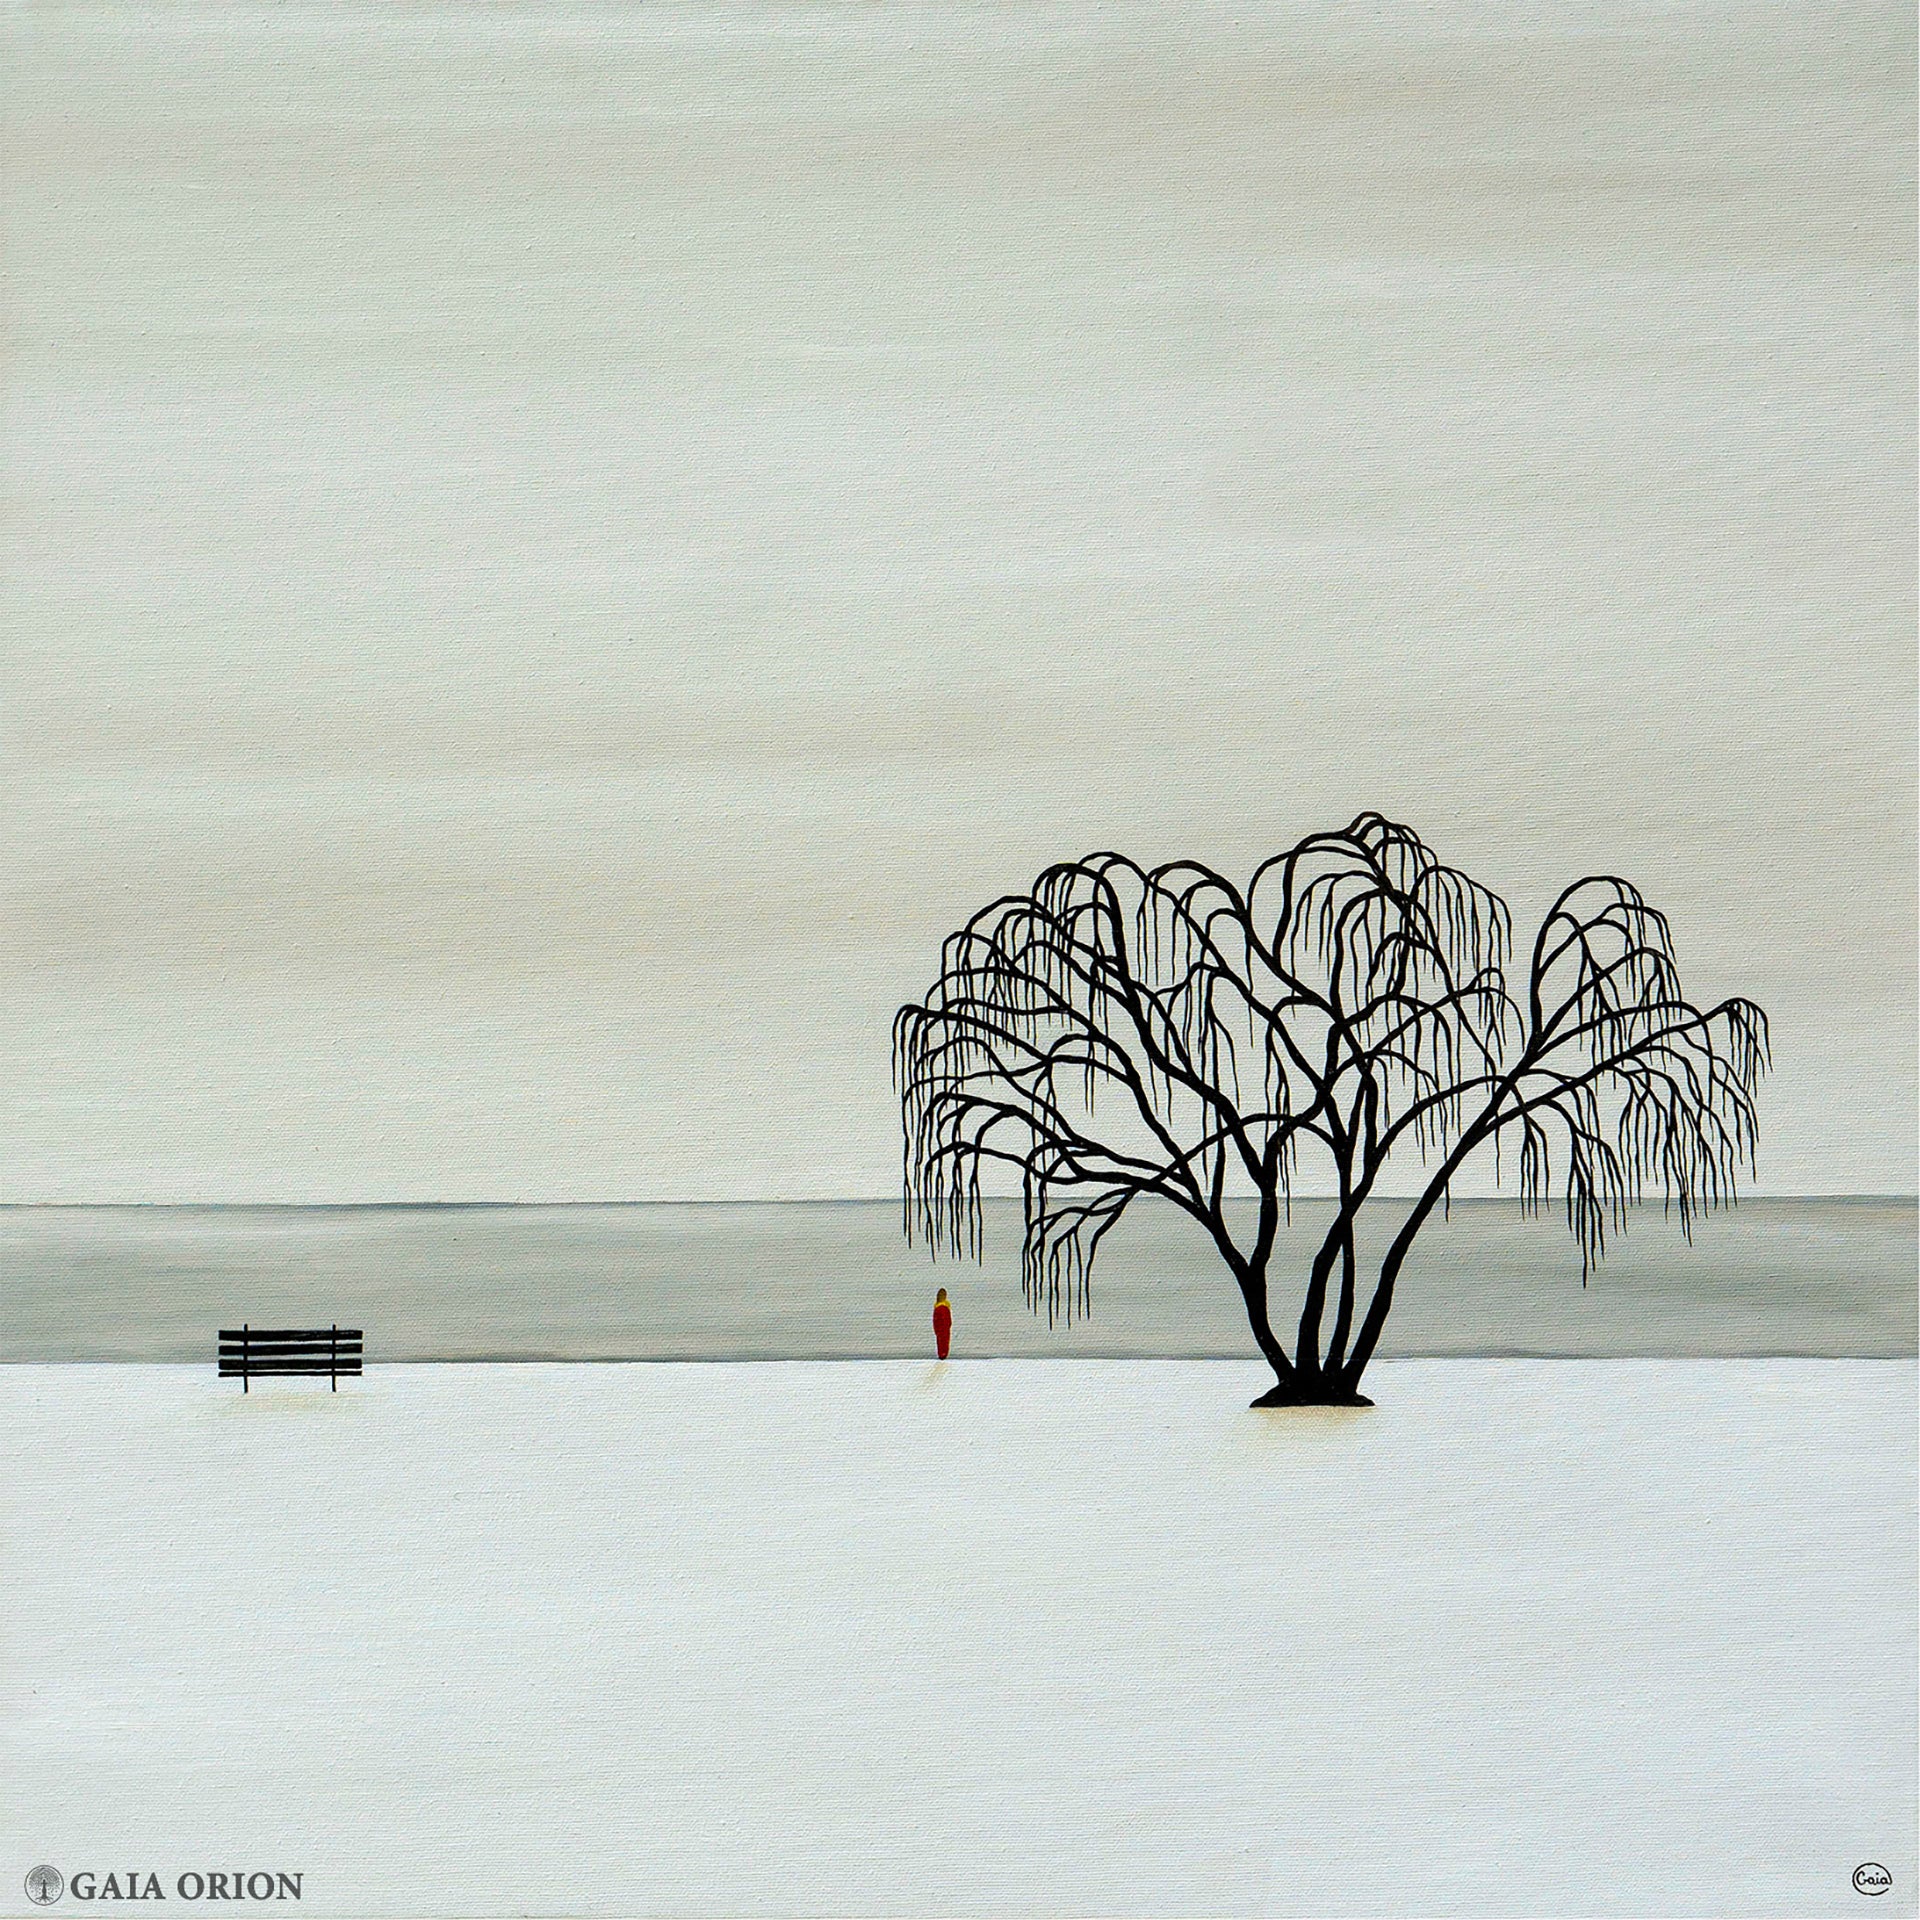 A winter scene with a person under a willow tree un front of a lake